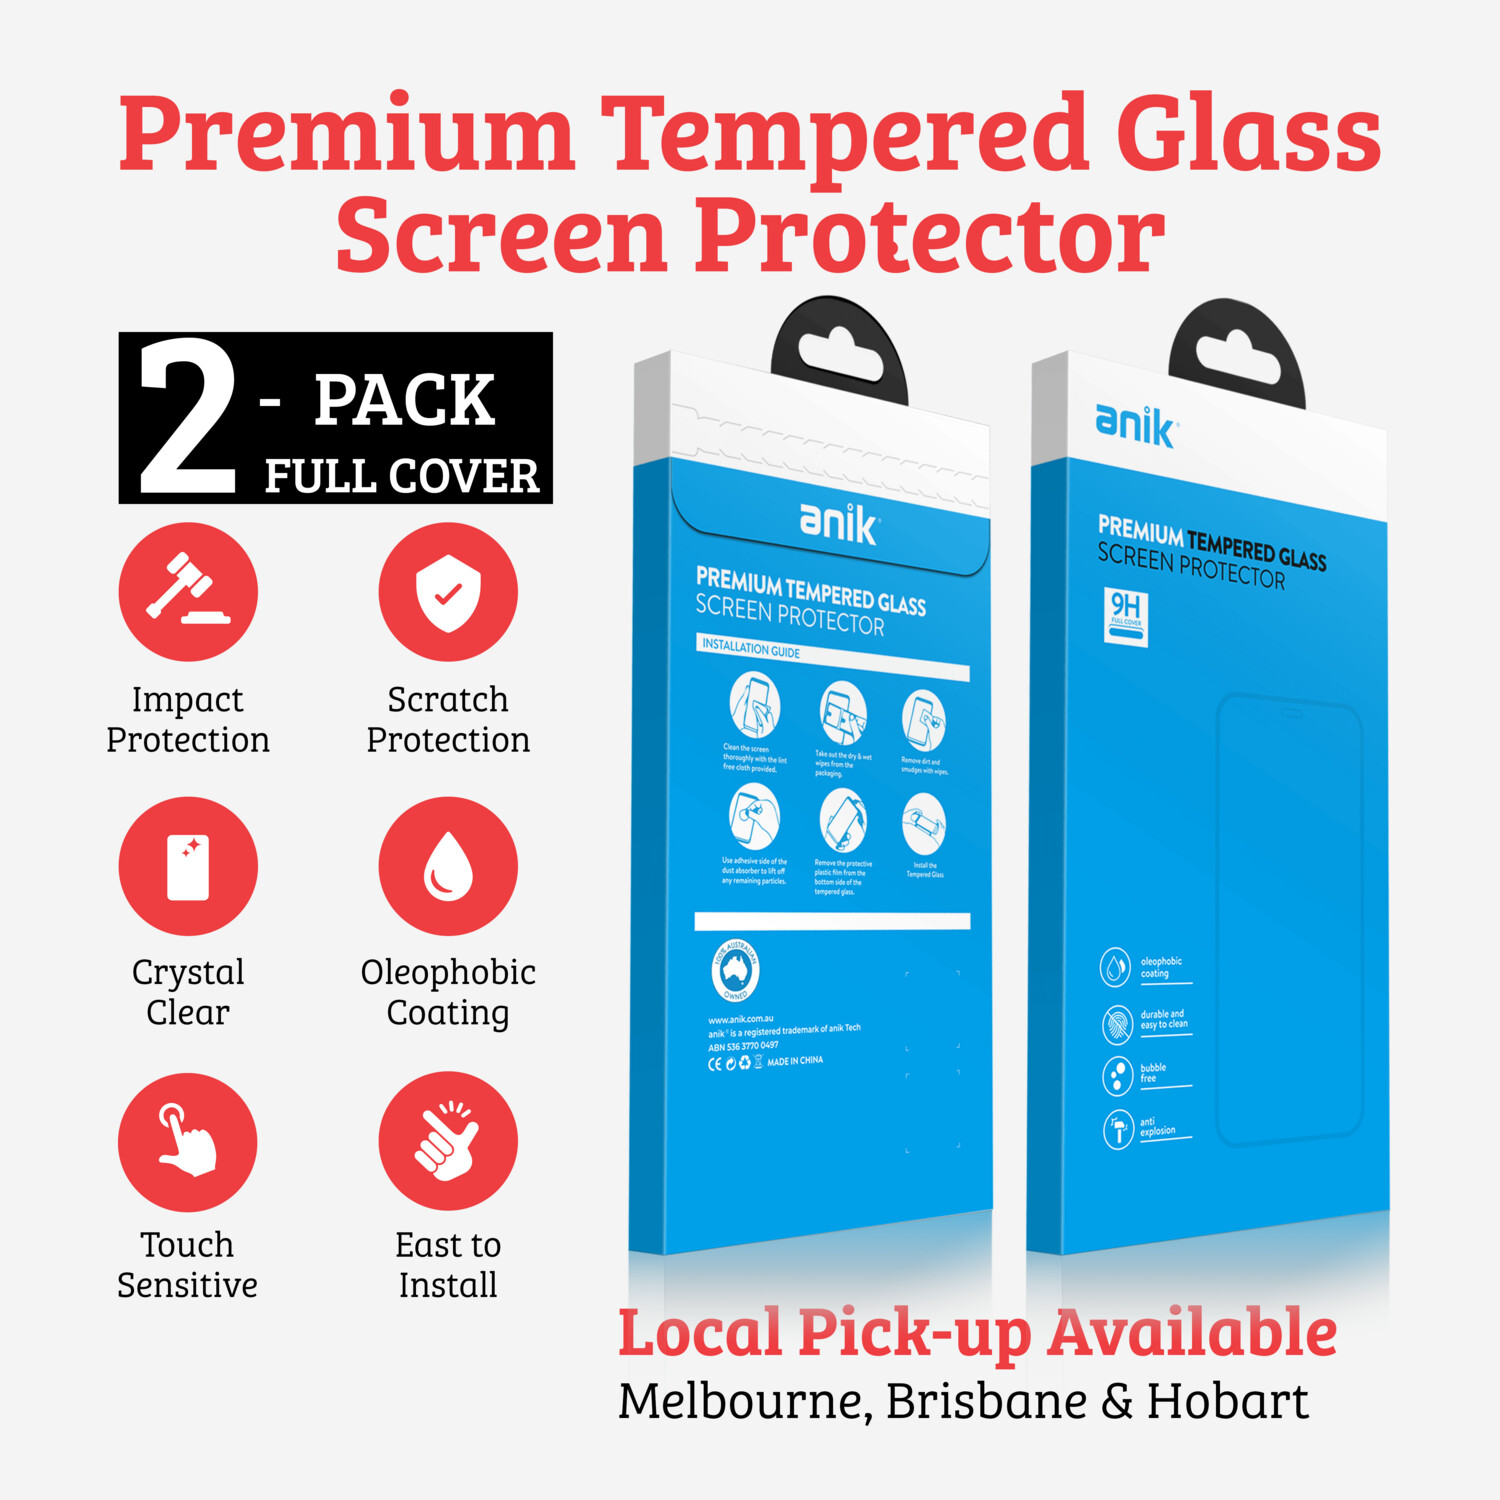 ANIK Premium Full Cover Tempered Glass Screen Protector for iPhone 11 [2 Pack]